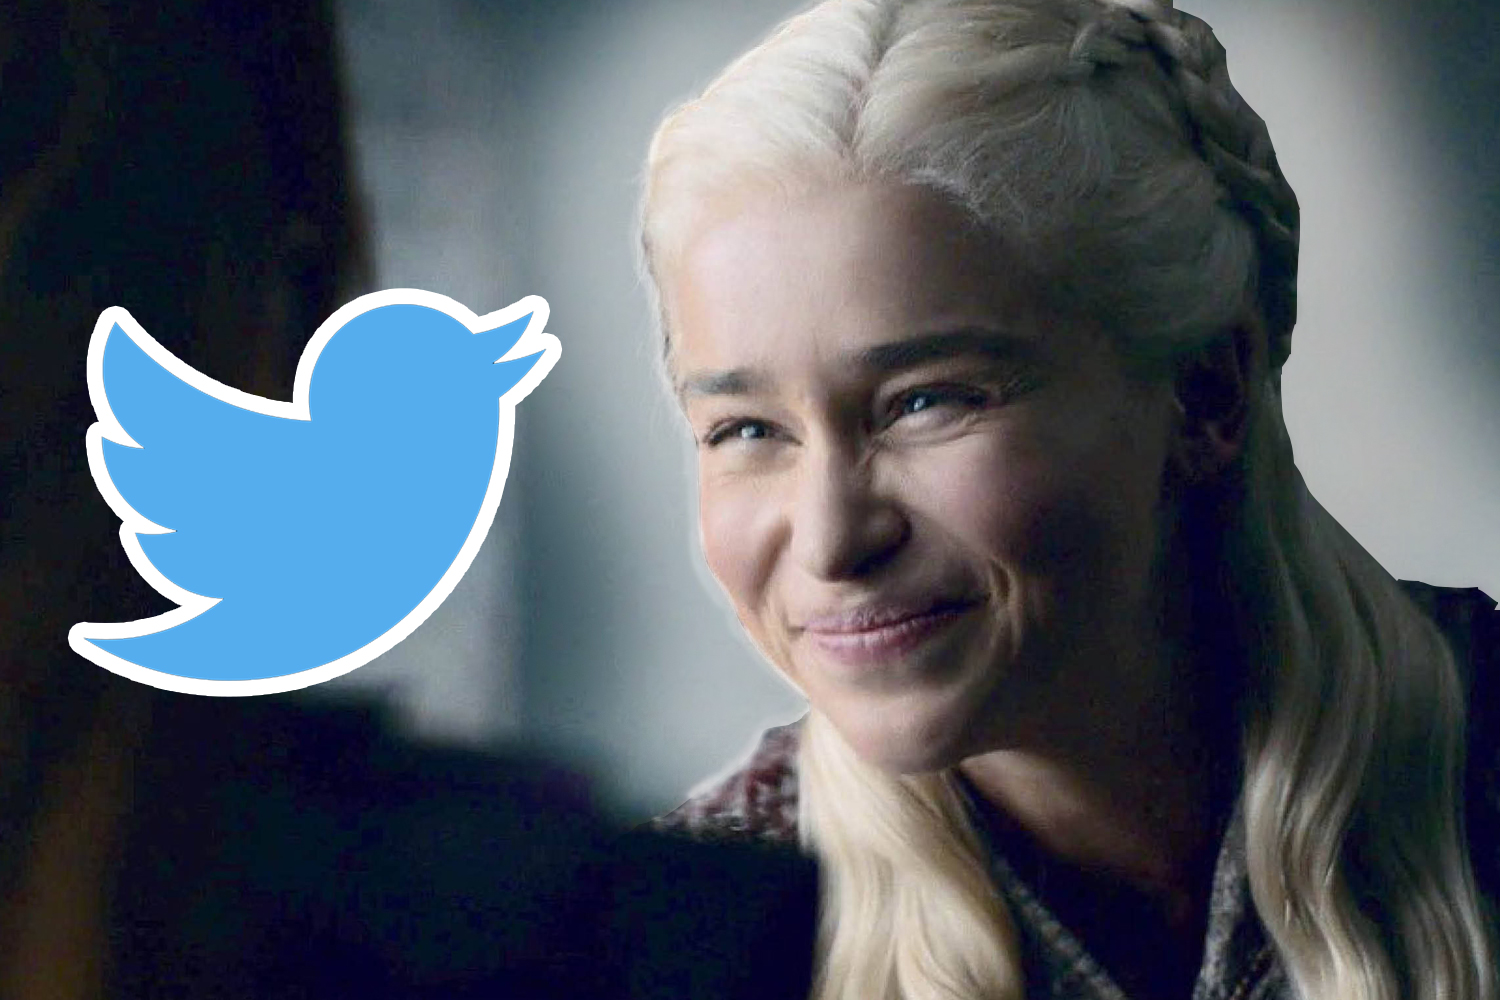 GRAPHIC: The final season of "Game of Thrones" gave us hilarious fan reactions and spicy memes on Twitter. Emilia Clarke as Daenerys Targaryen squinting and smiling. She is facing Twitter's blue bird logo. Image courtesy of HBO and Twitter. Graphic by The Signal Online Editor Alyssa Shotwell.